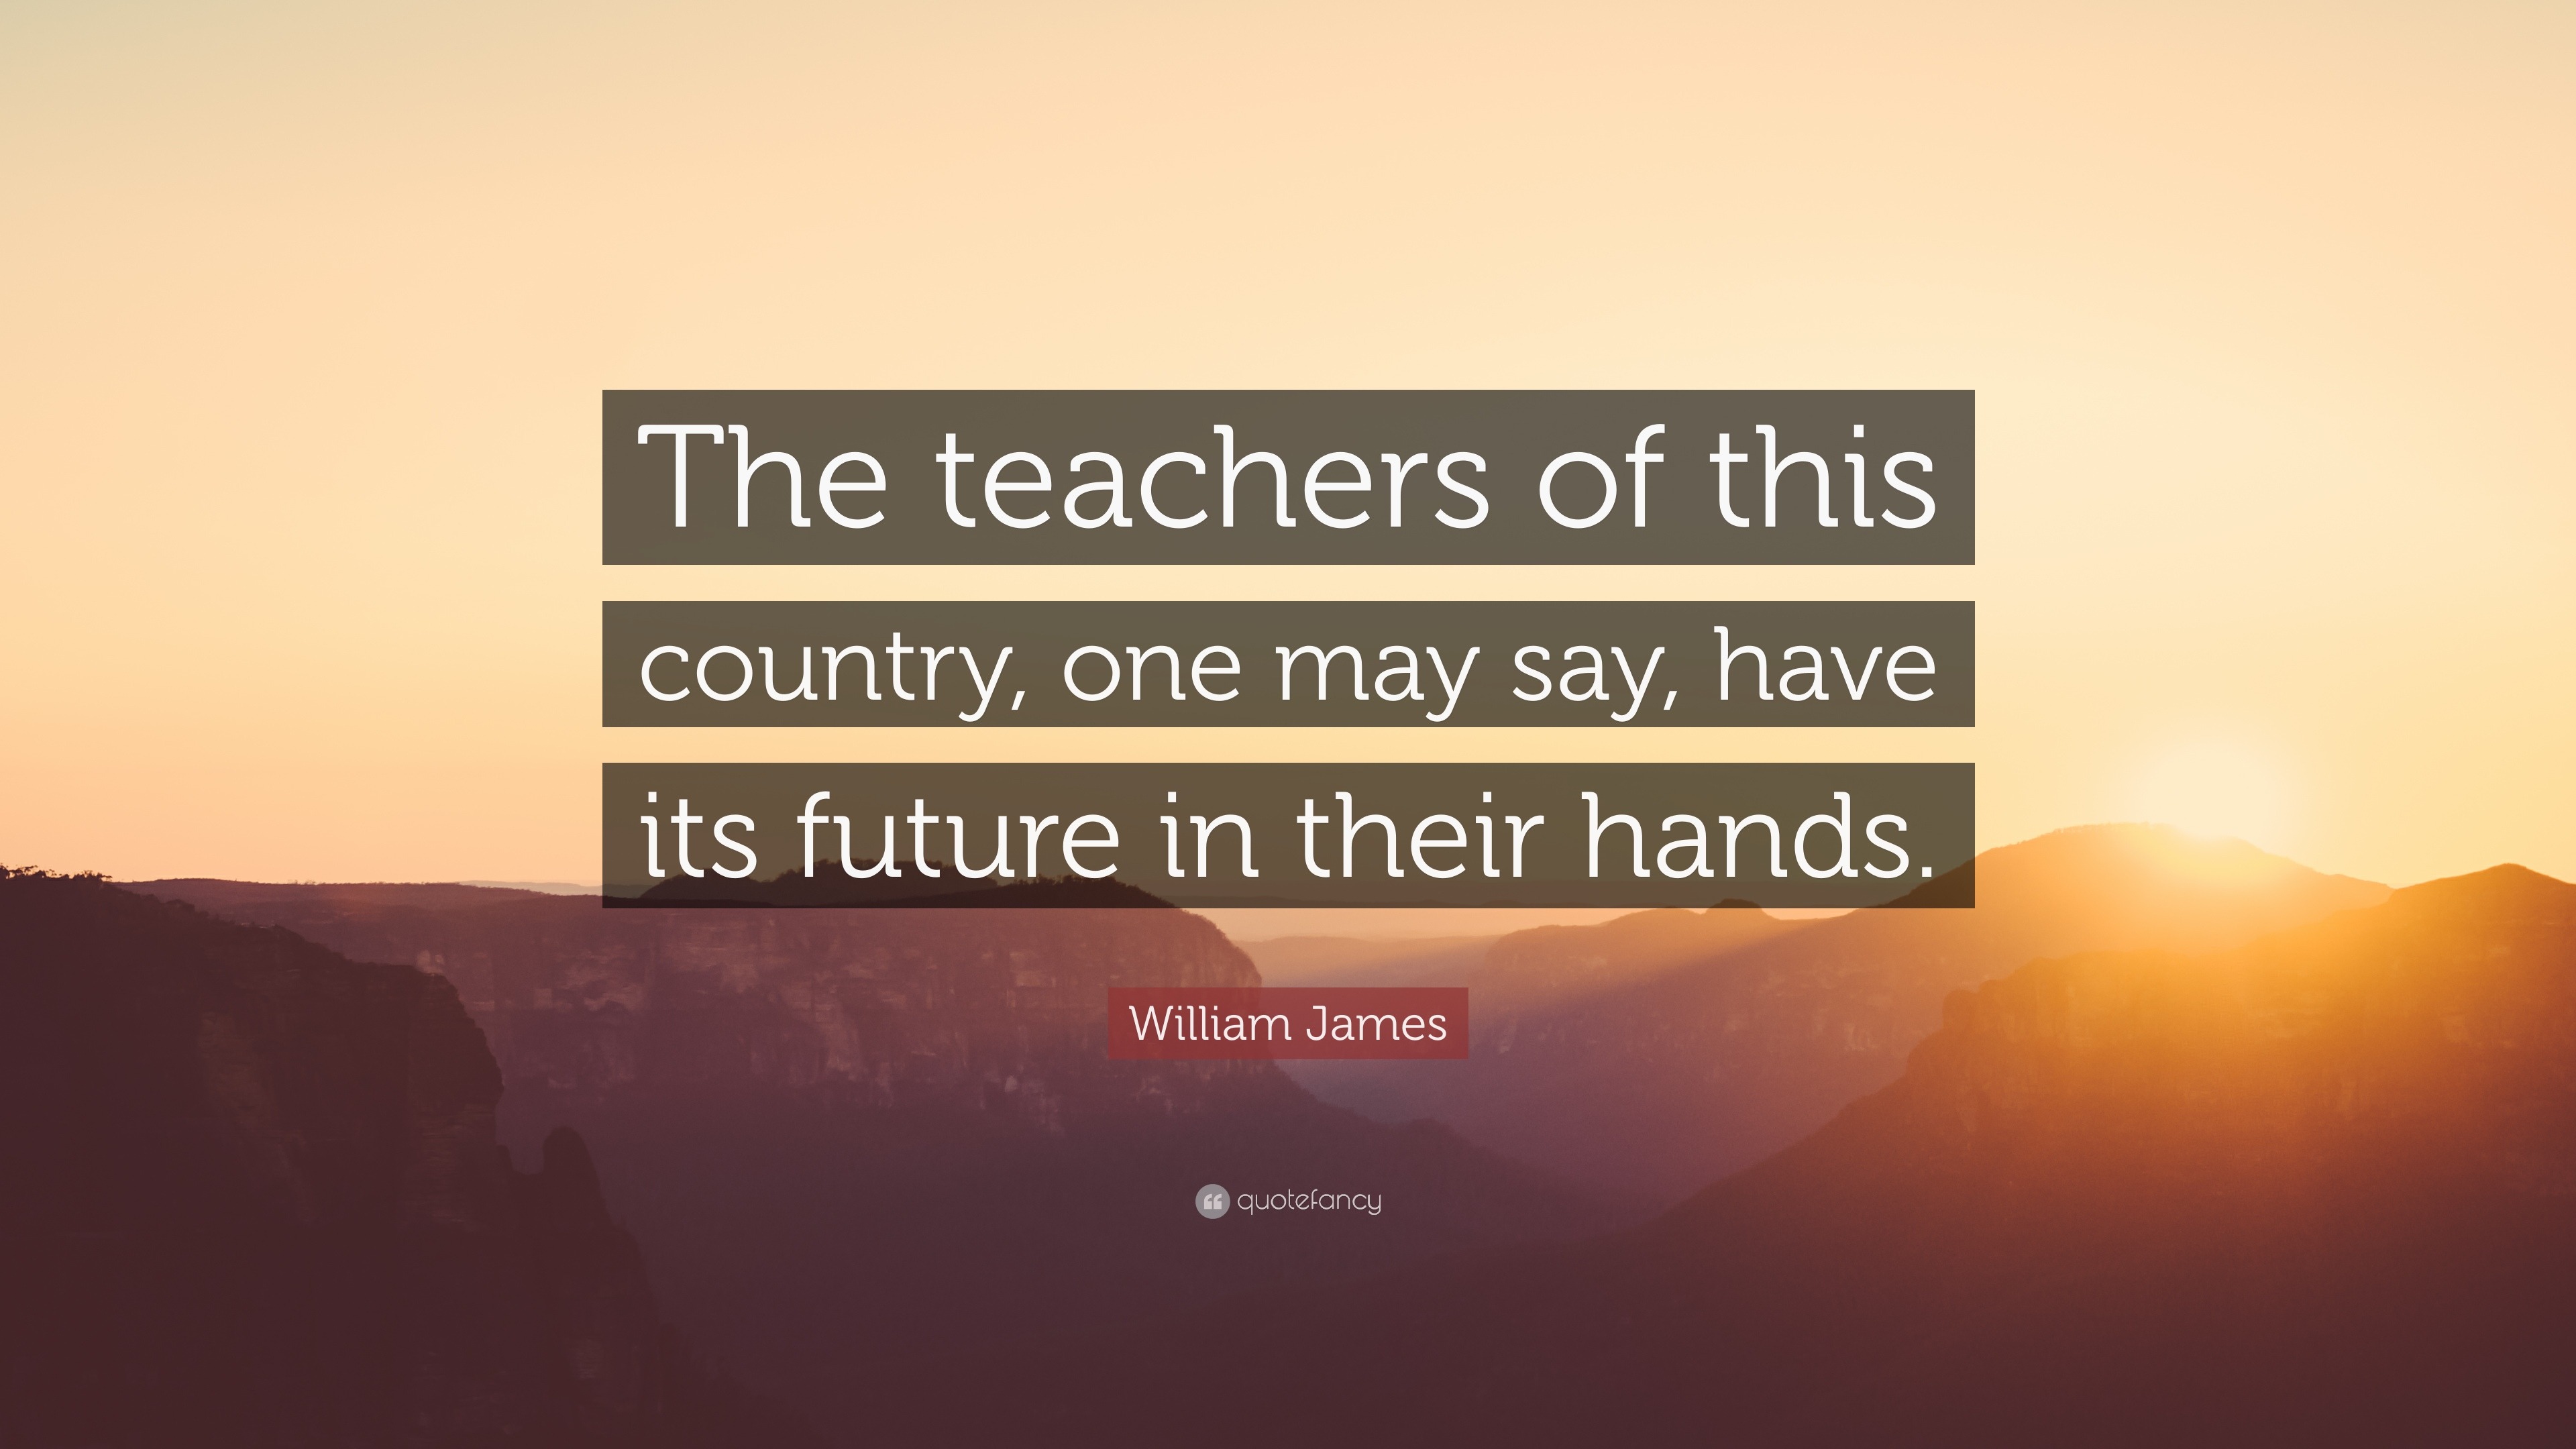 William James Quote: “The teachers of this country, one may say, have ...